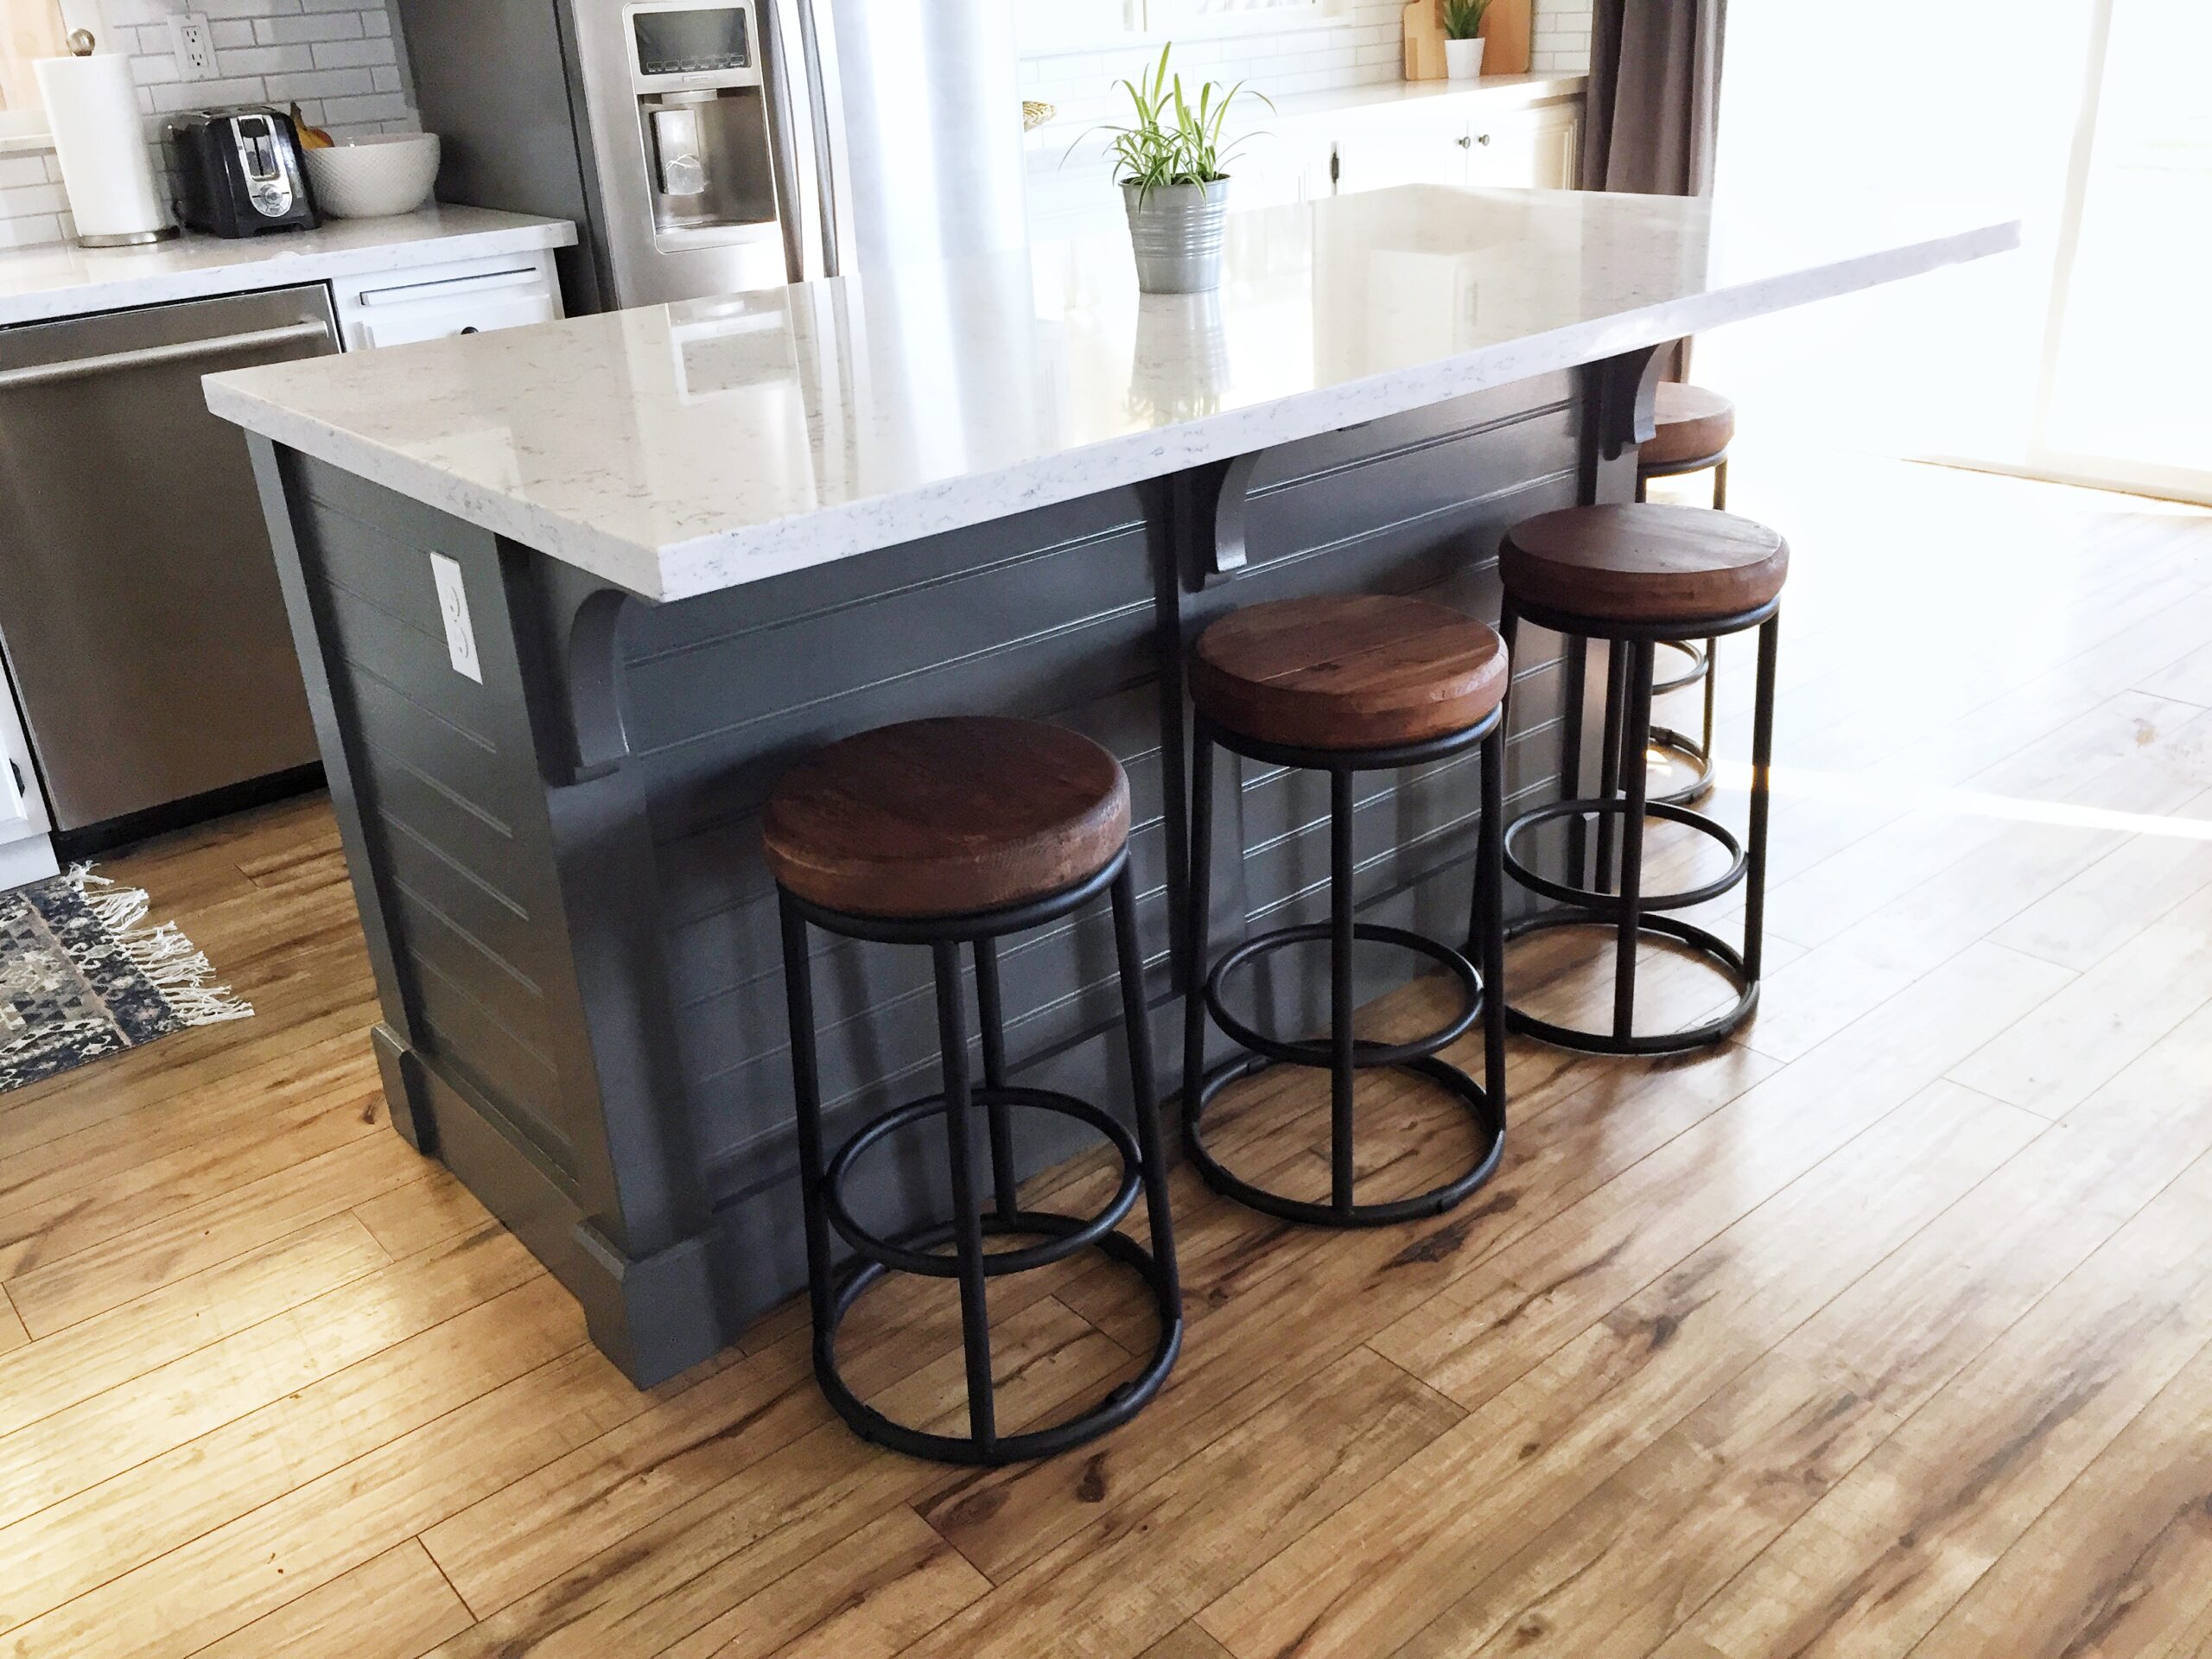 A Diy Kitchen Island Make It Yourself, How To Build A Kitchen Island On Wheels